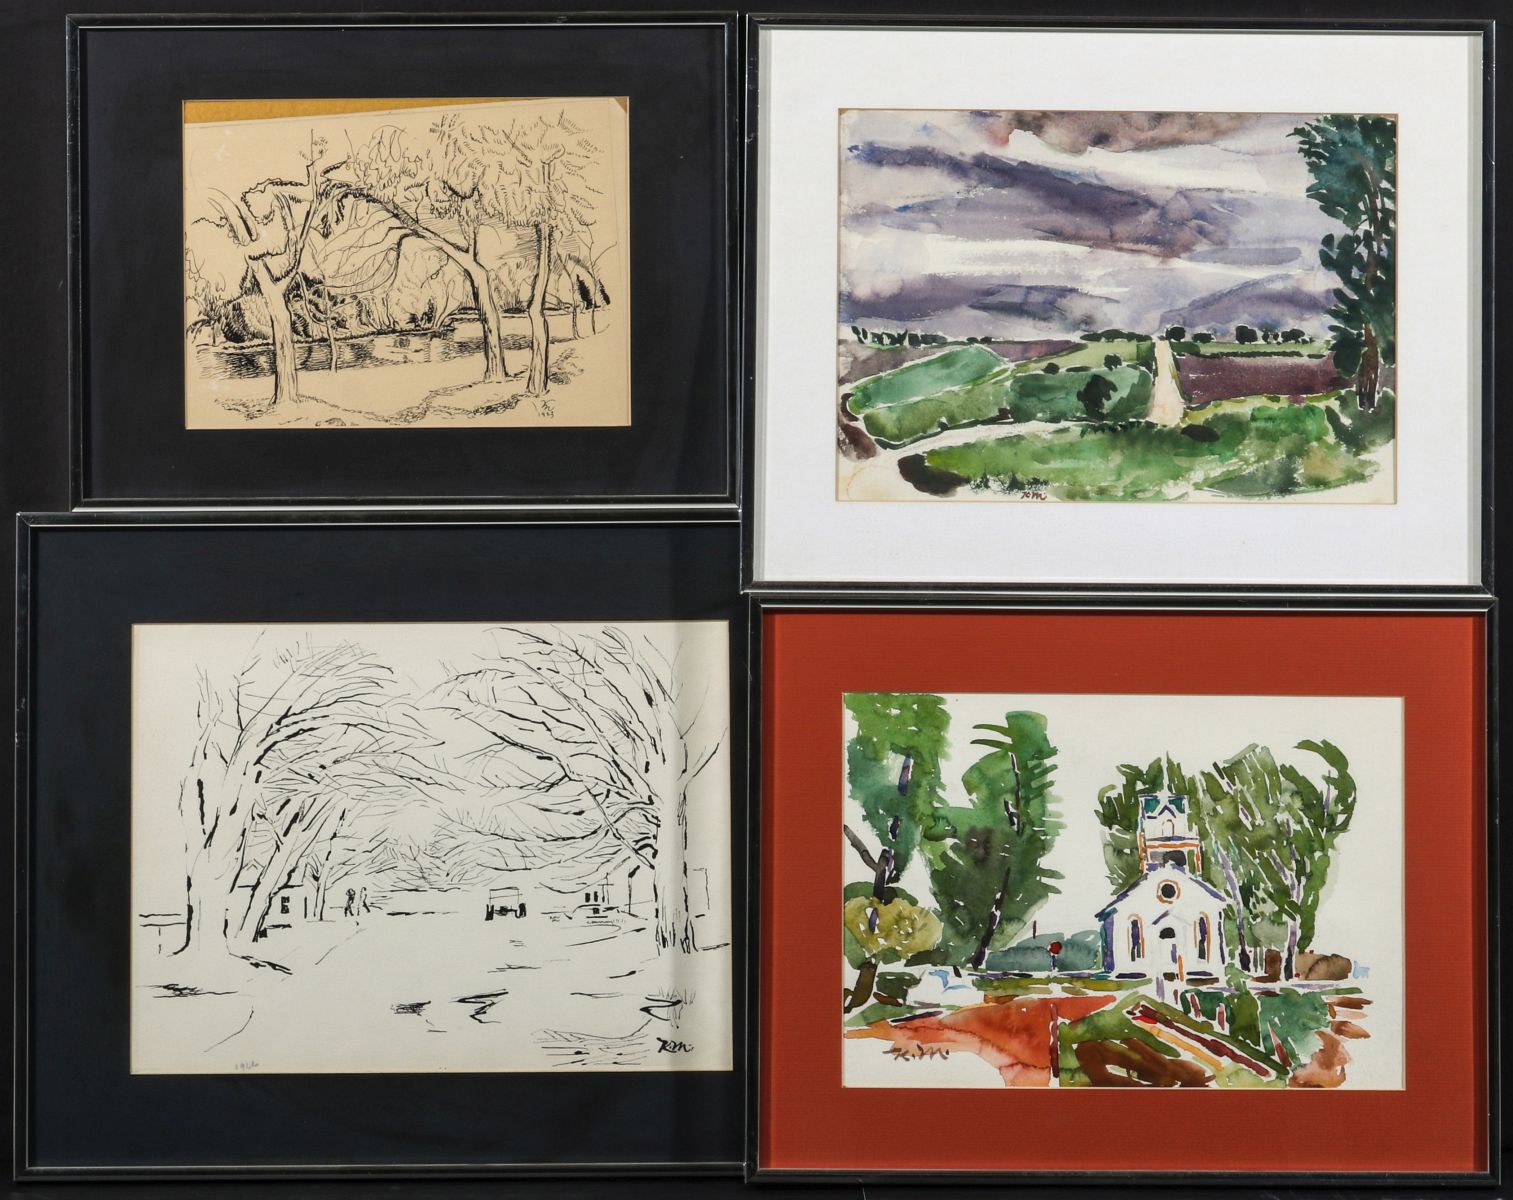 KARL MATTERN (1892-1969) WATERCOLORS AND SKETCHES